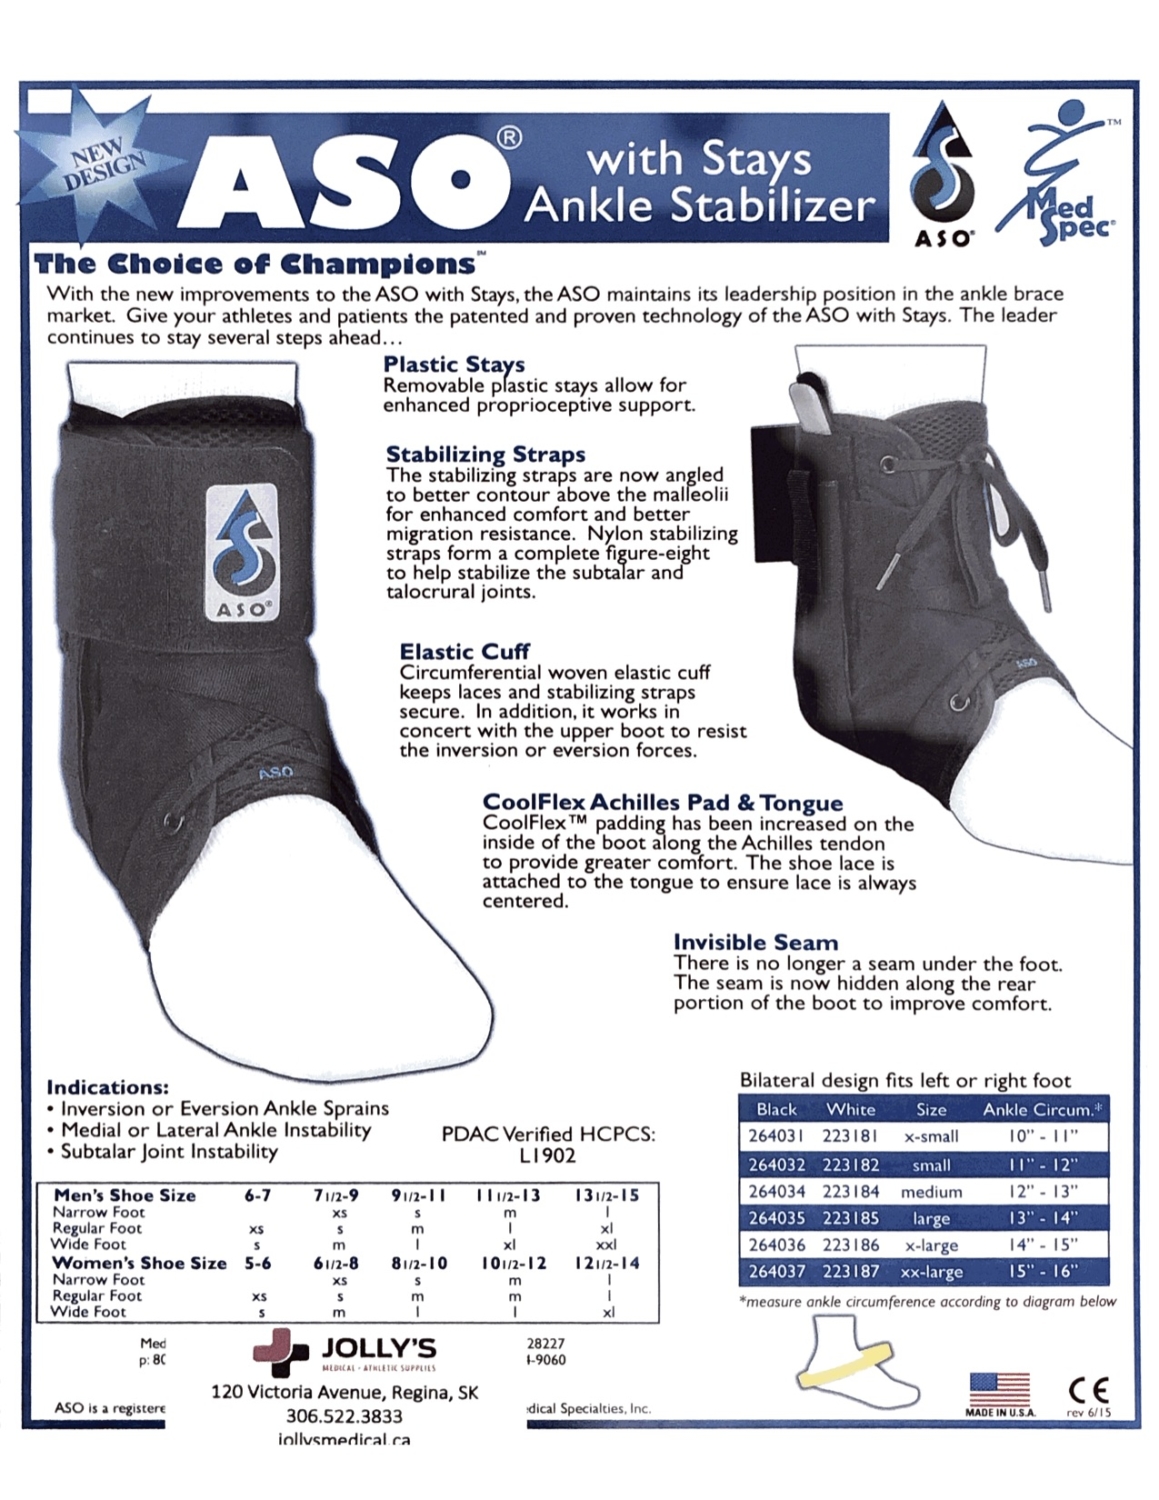 med spec ankle brace | Jolly's Medical + Athletic Supplies